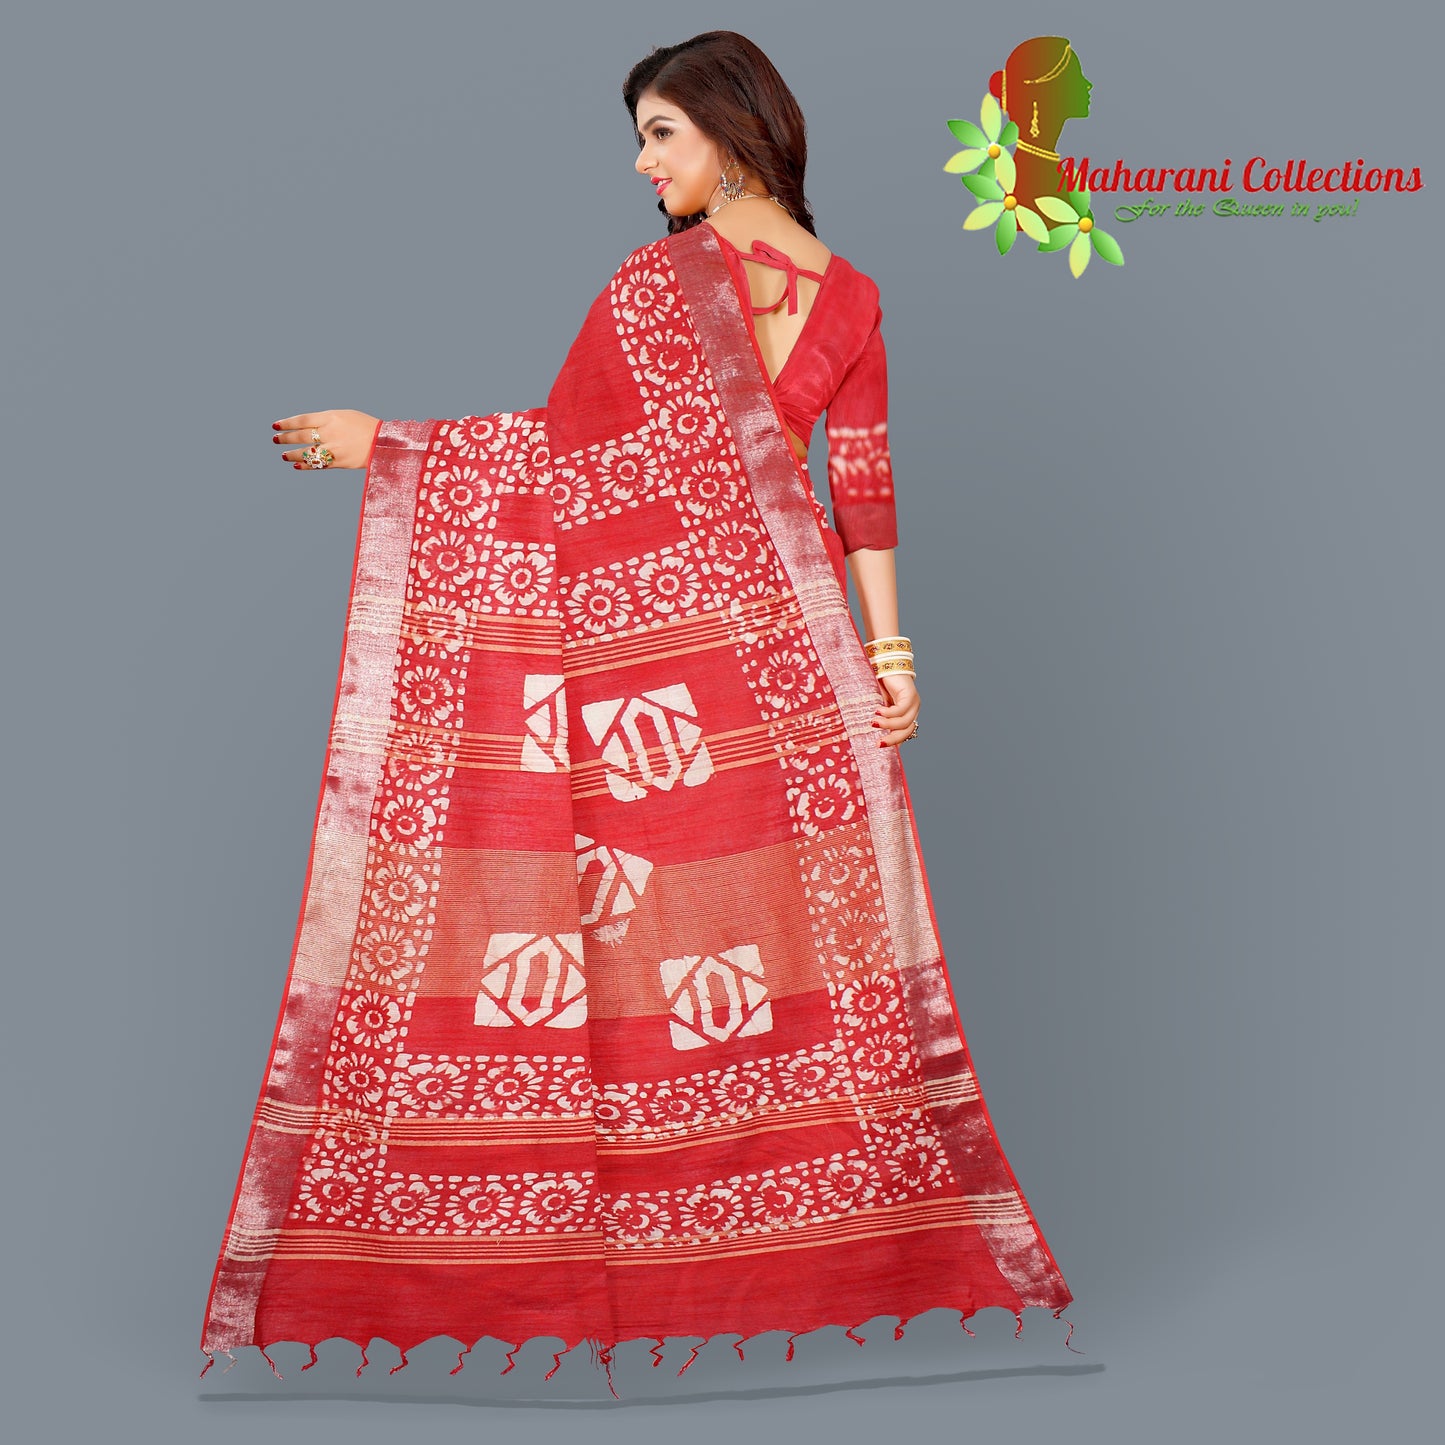 Pure Handloom Linen Silk (Matka) Saree - Red (with stitched blouse and petticoat)